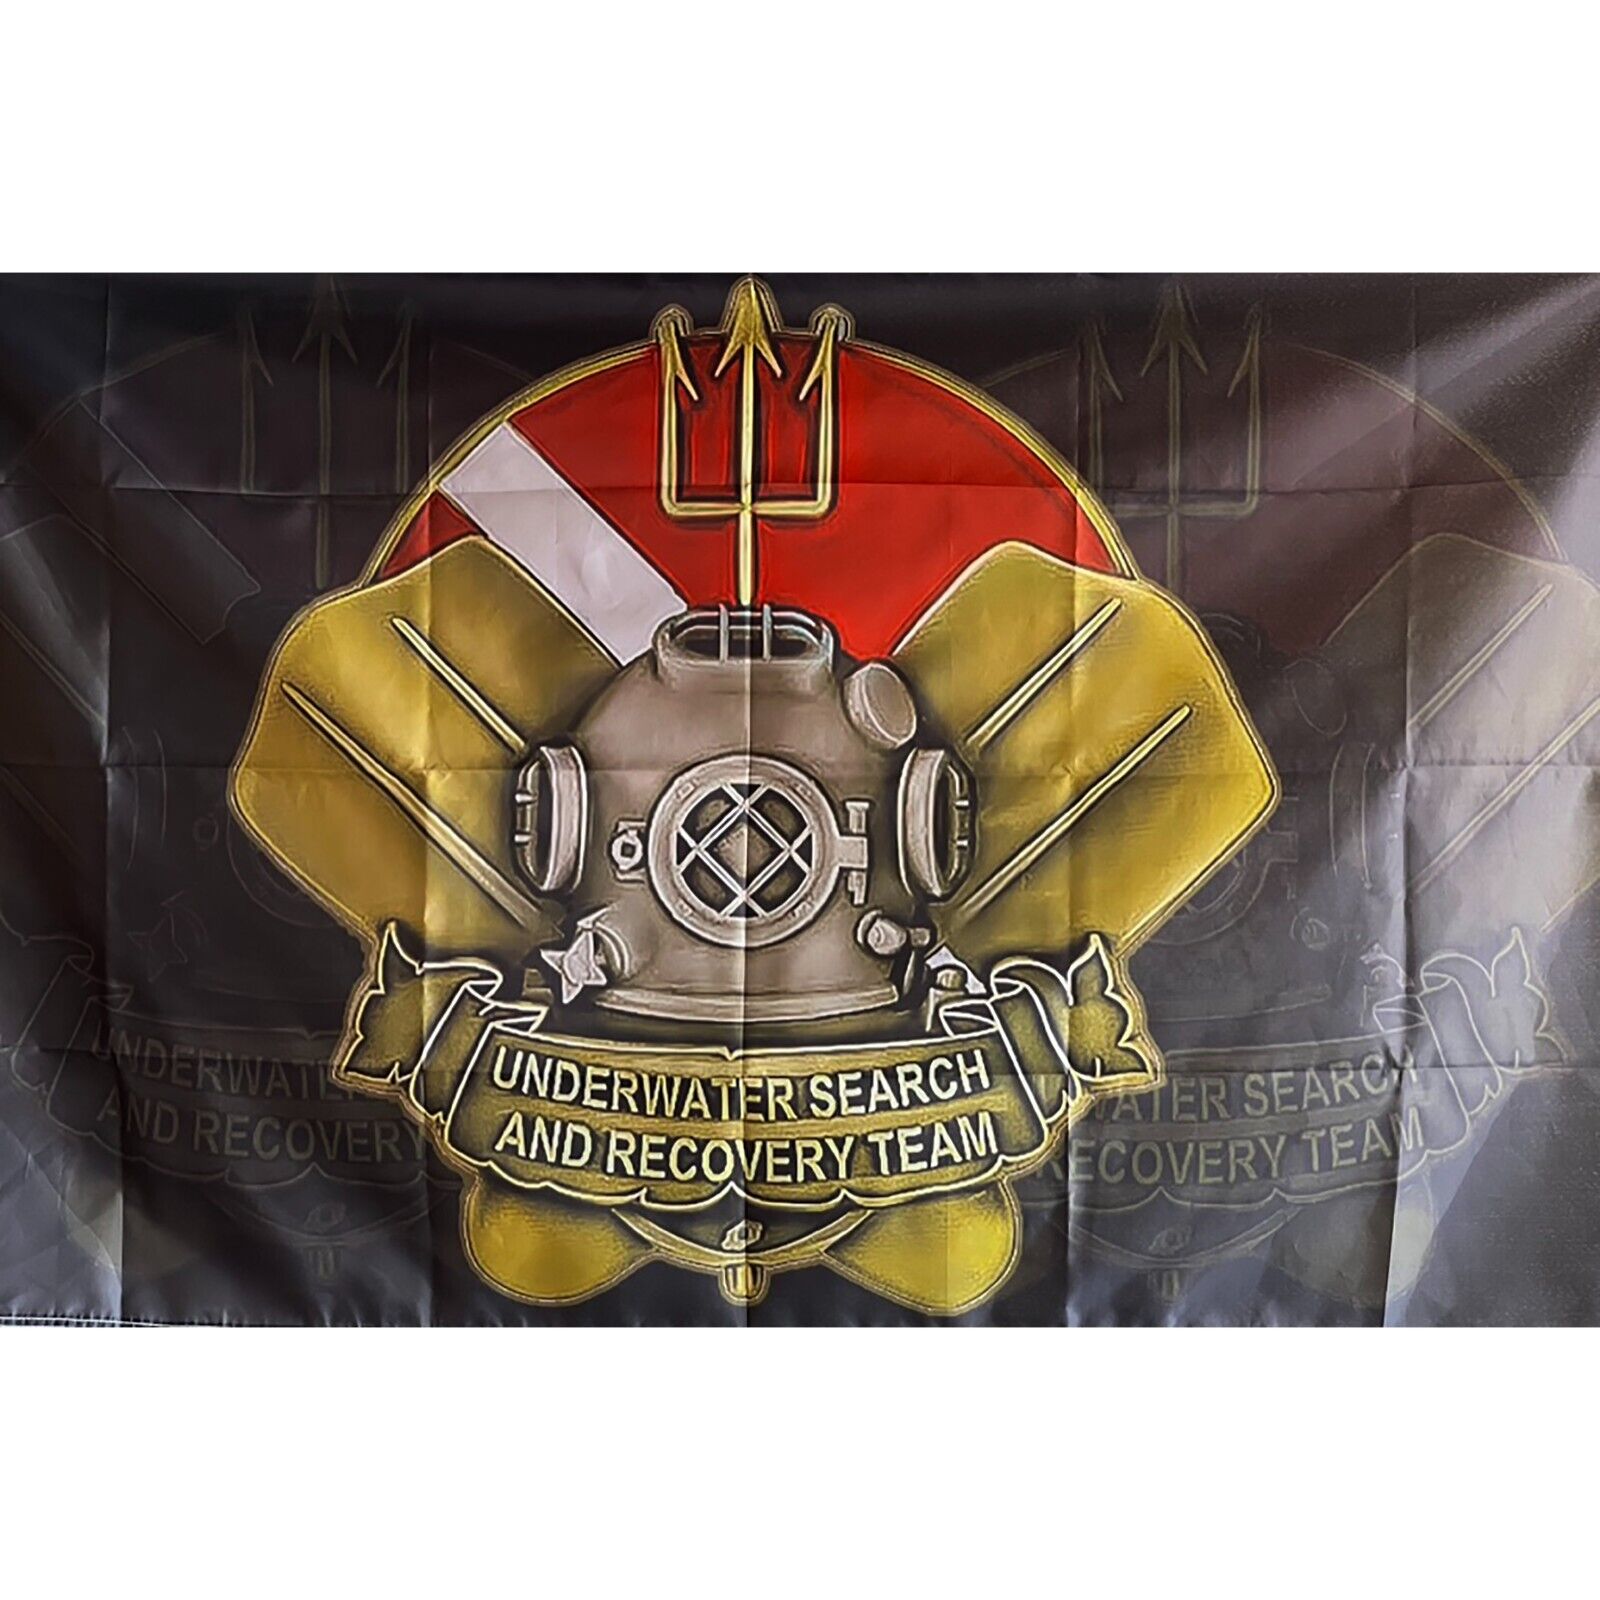 Underwater Search and Recovery Team 3 x 5 flag